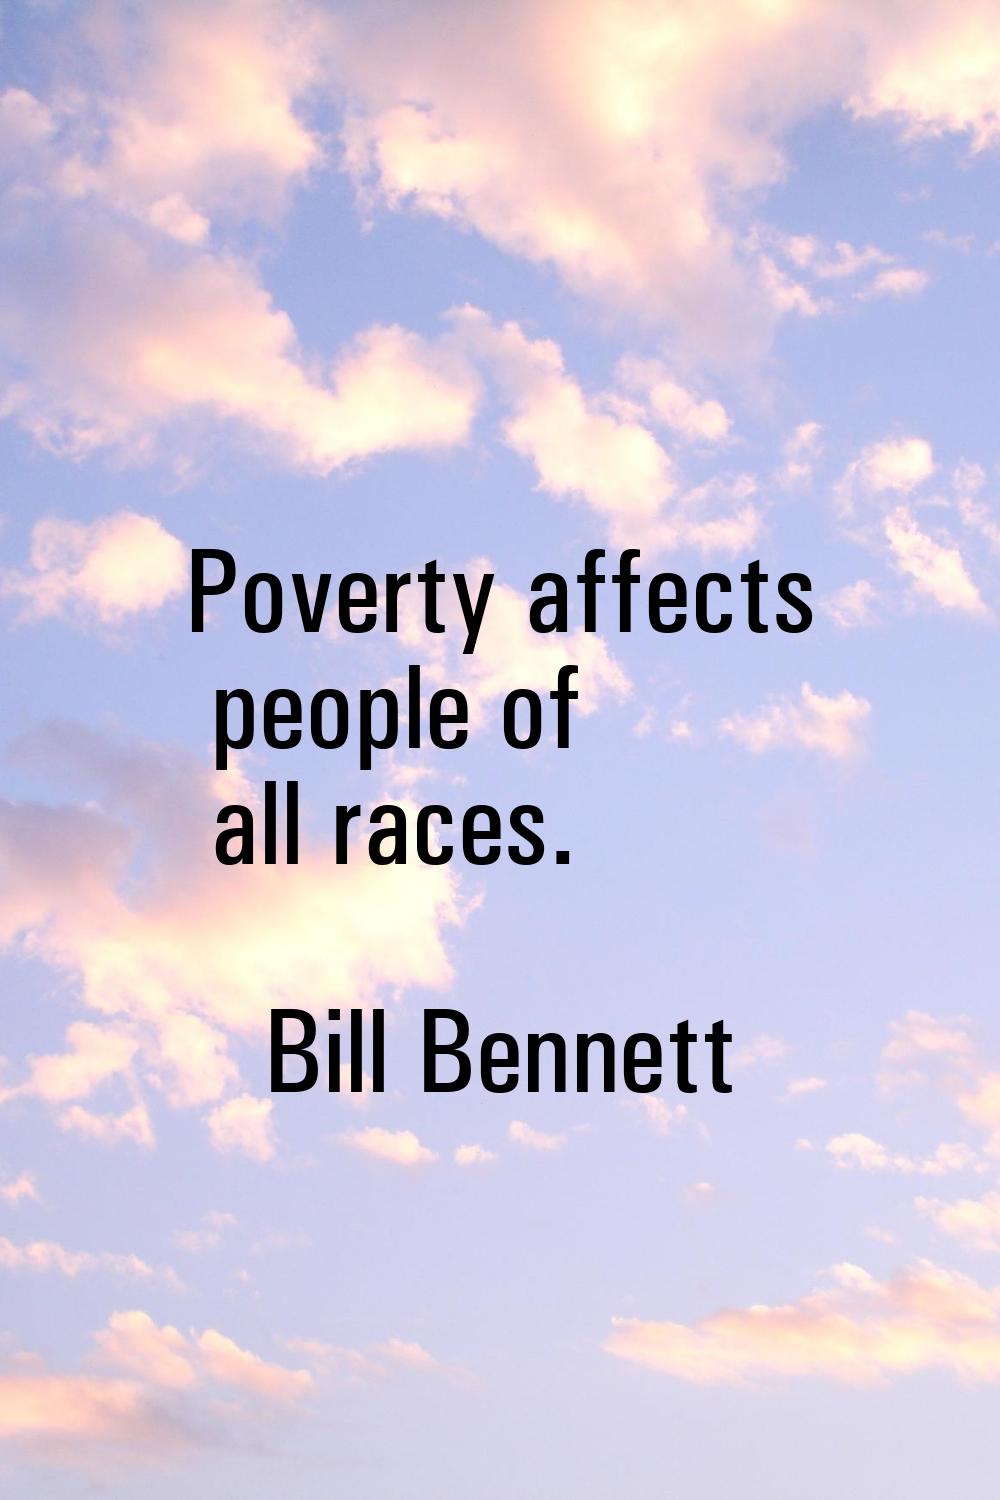 Poverty affects people of all races.